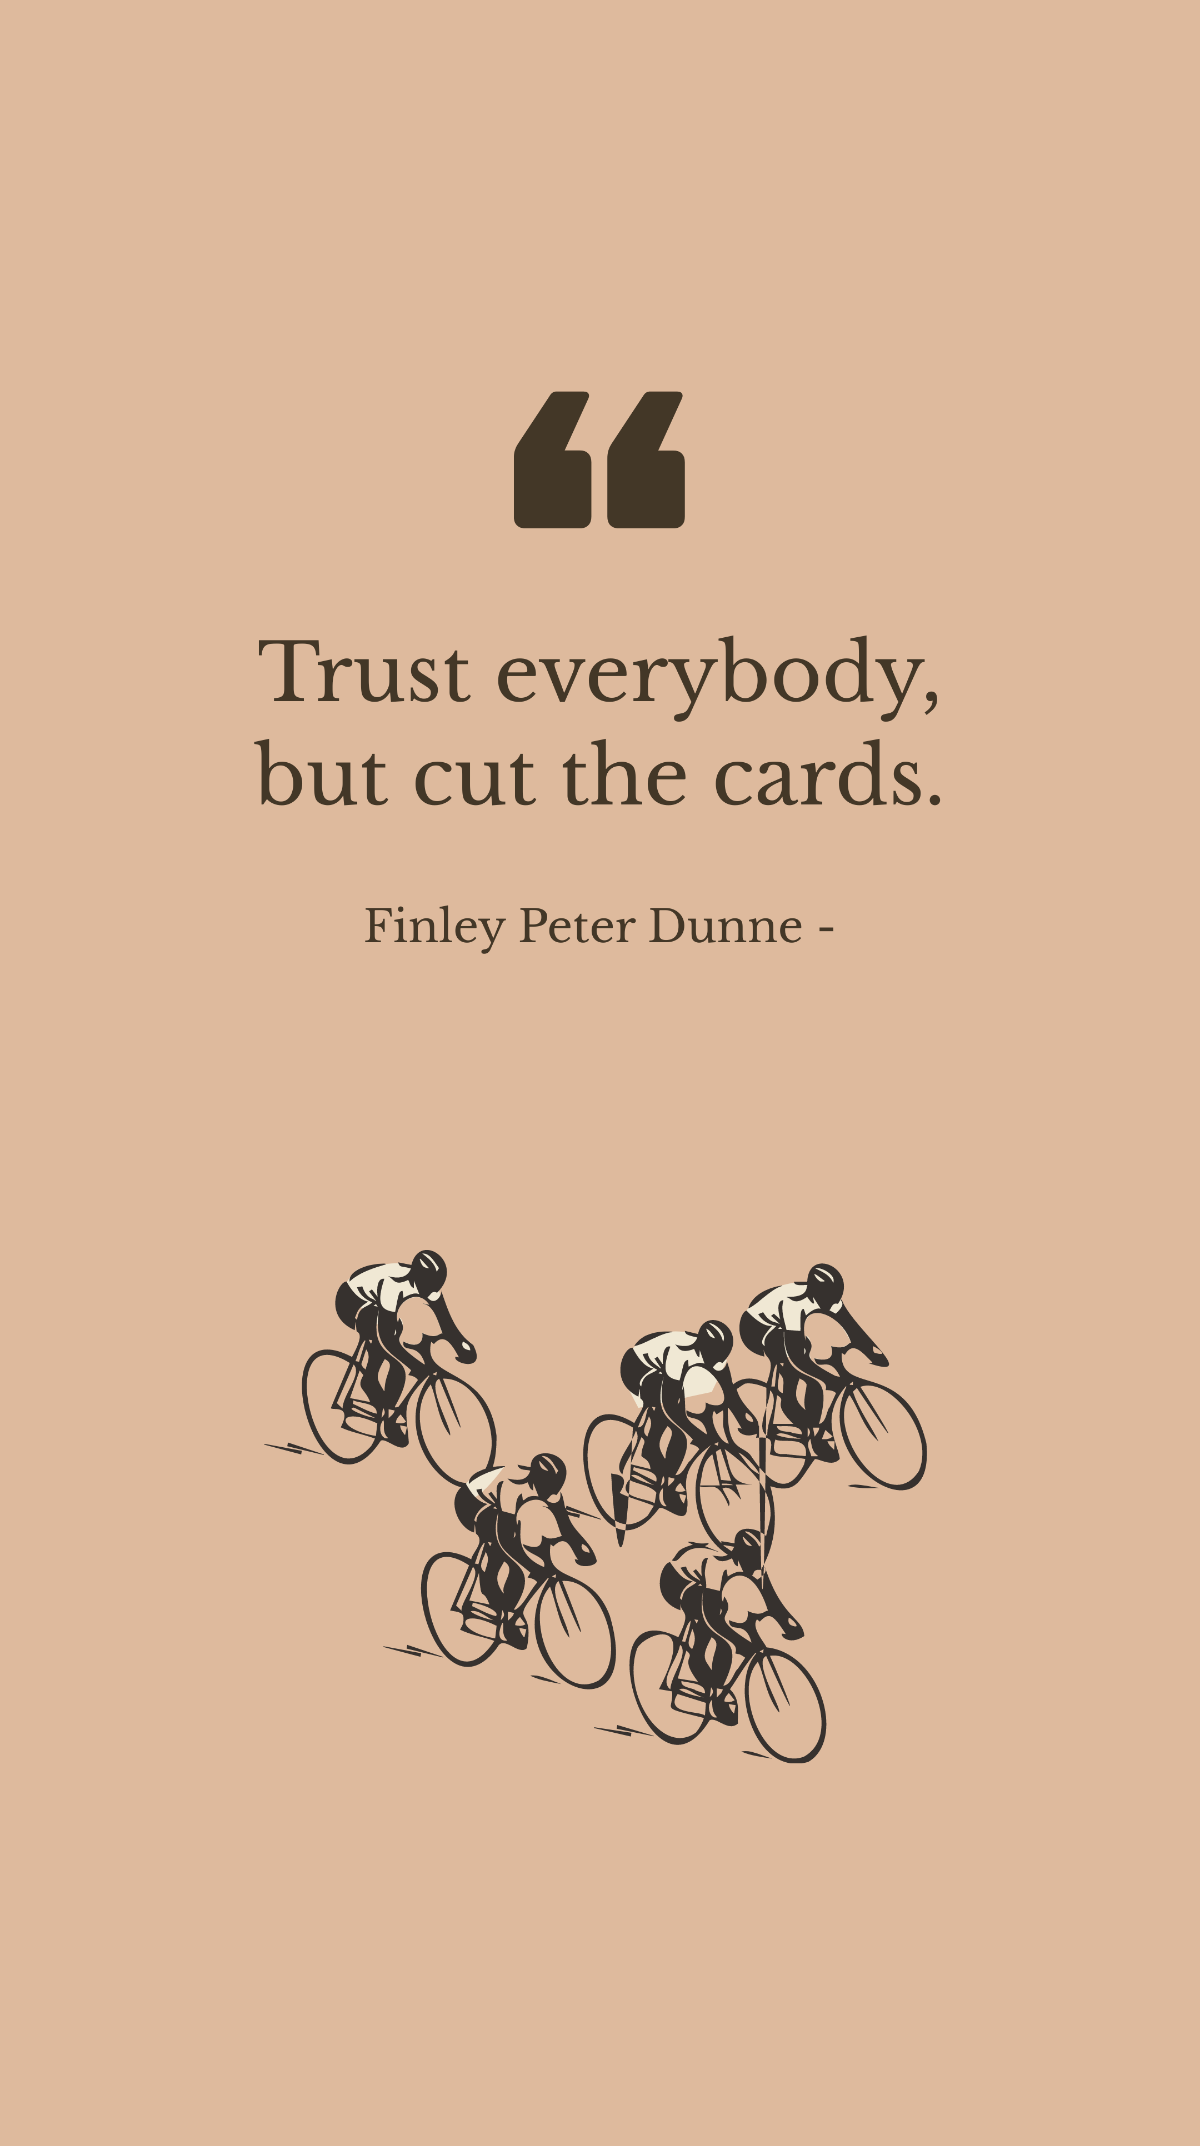 Finley Peter Dunne - Trust everybody, but cut the cards.